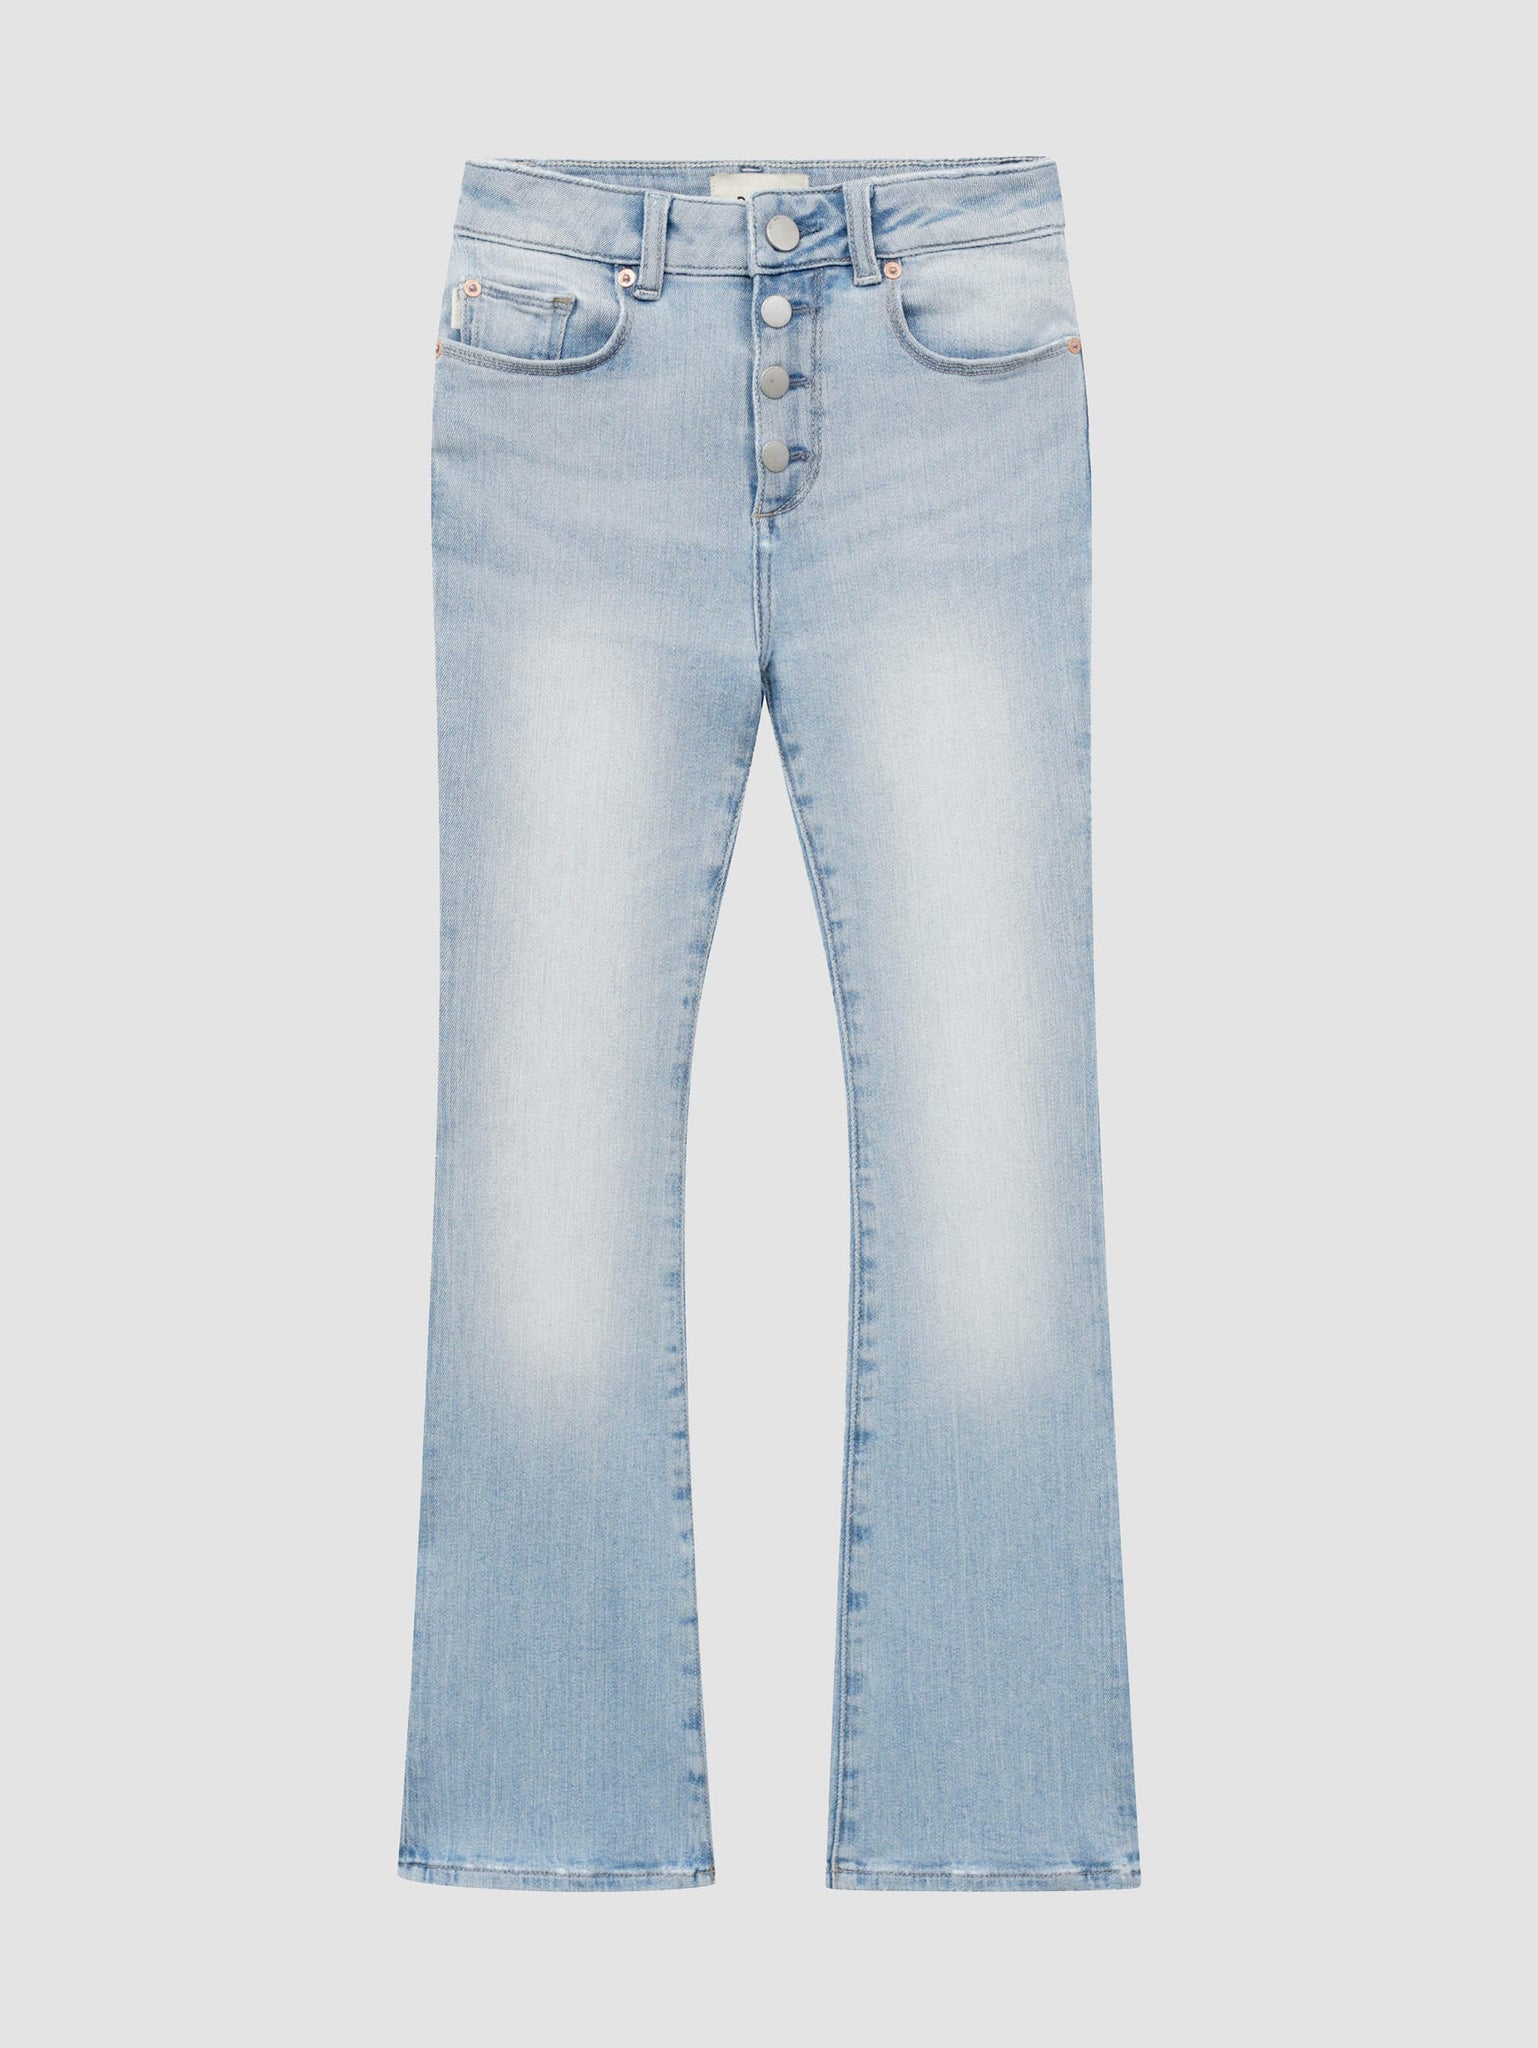 Claire Bootcut Jeans High Rise in Light Denim